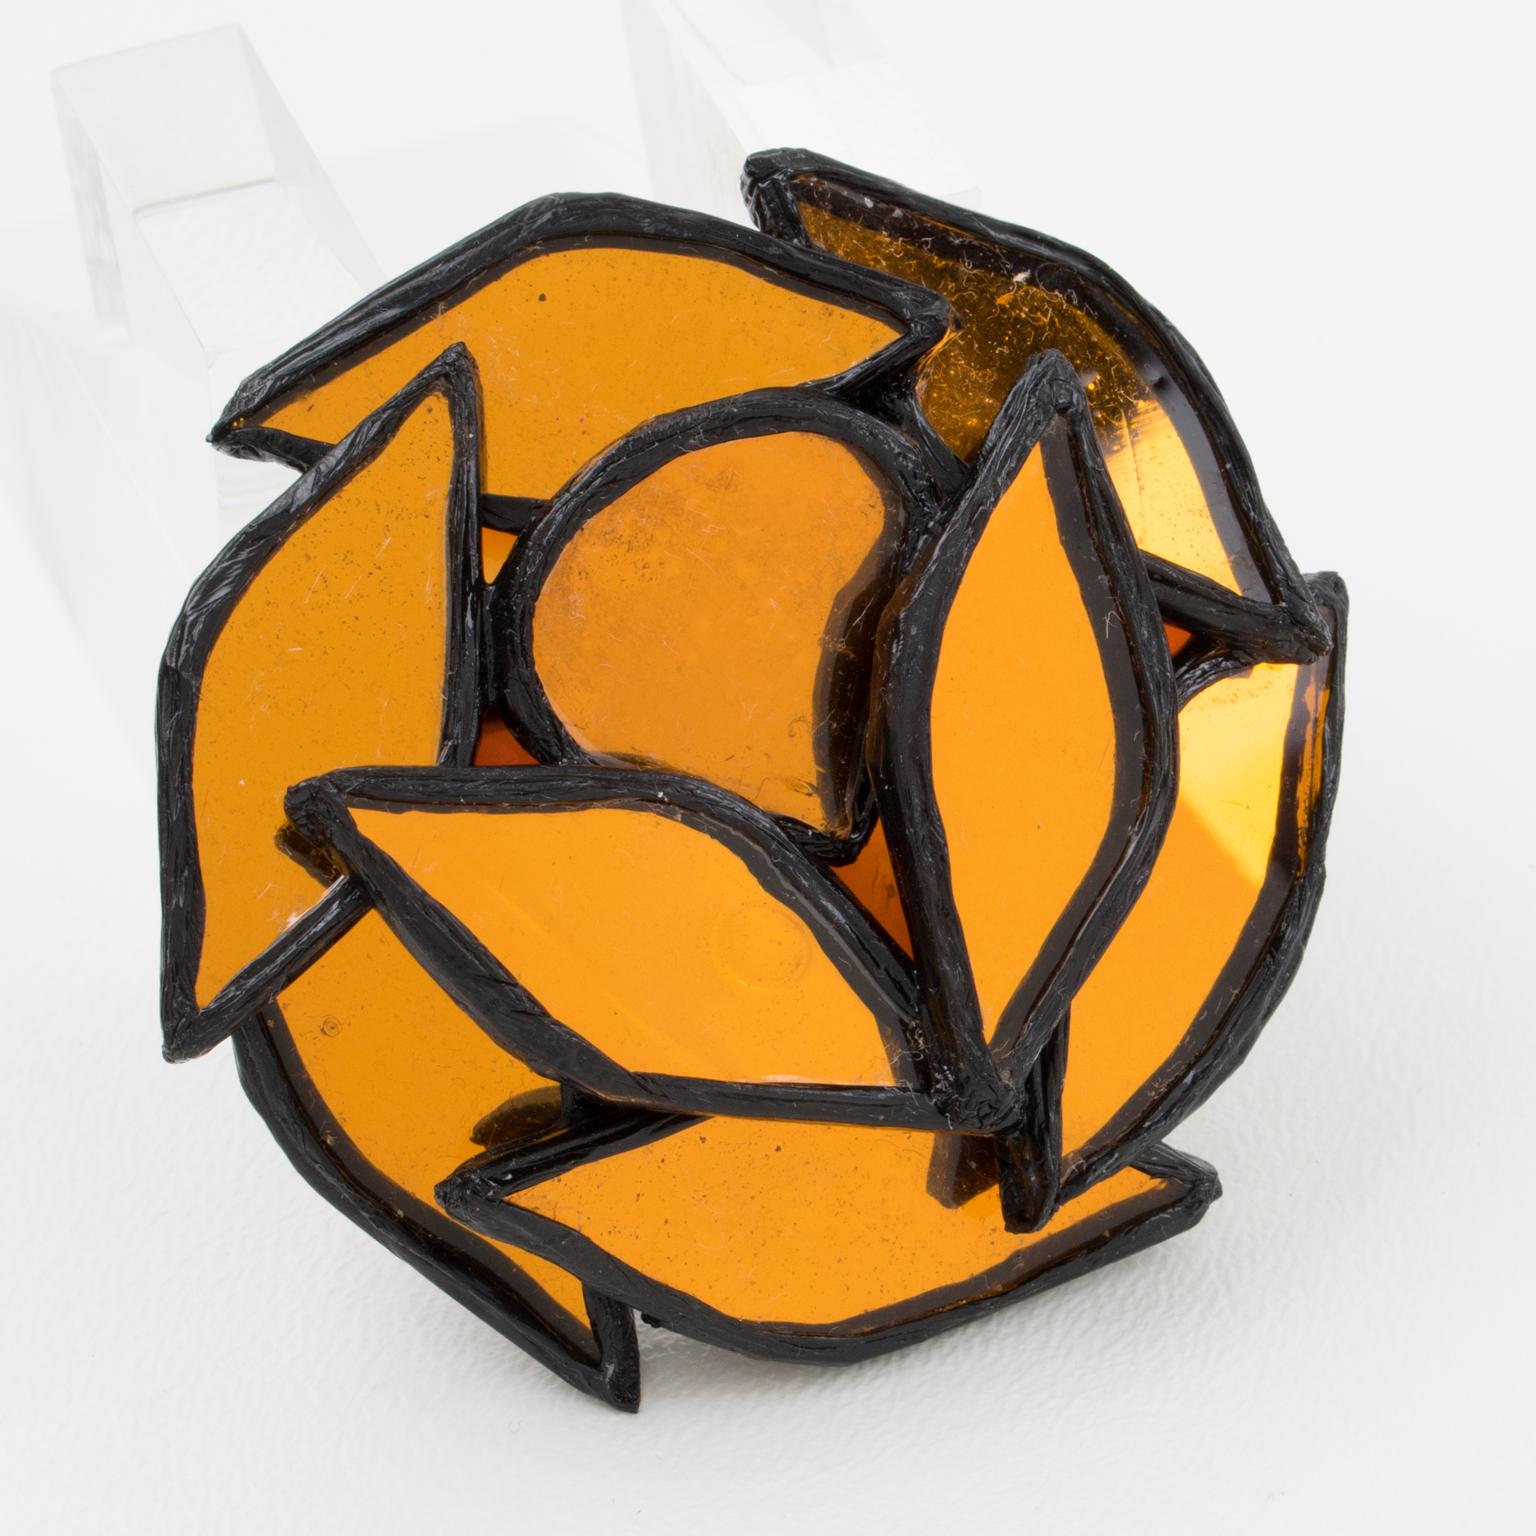 This charming Irena Jaworska Talosel or resin pin brooch features a dimensional geometric rounded shape in black resin framing, topped with a mosaic of mirrors in orange saffron color. Marked underside with the artist's monogram signature. Irena